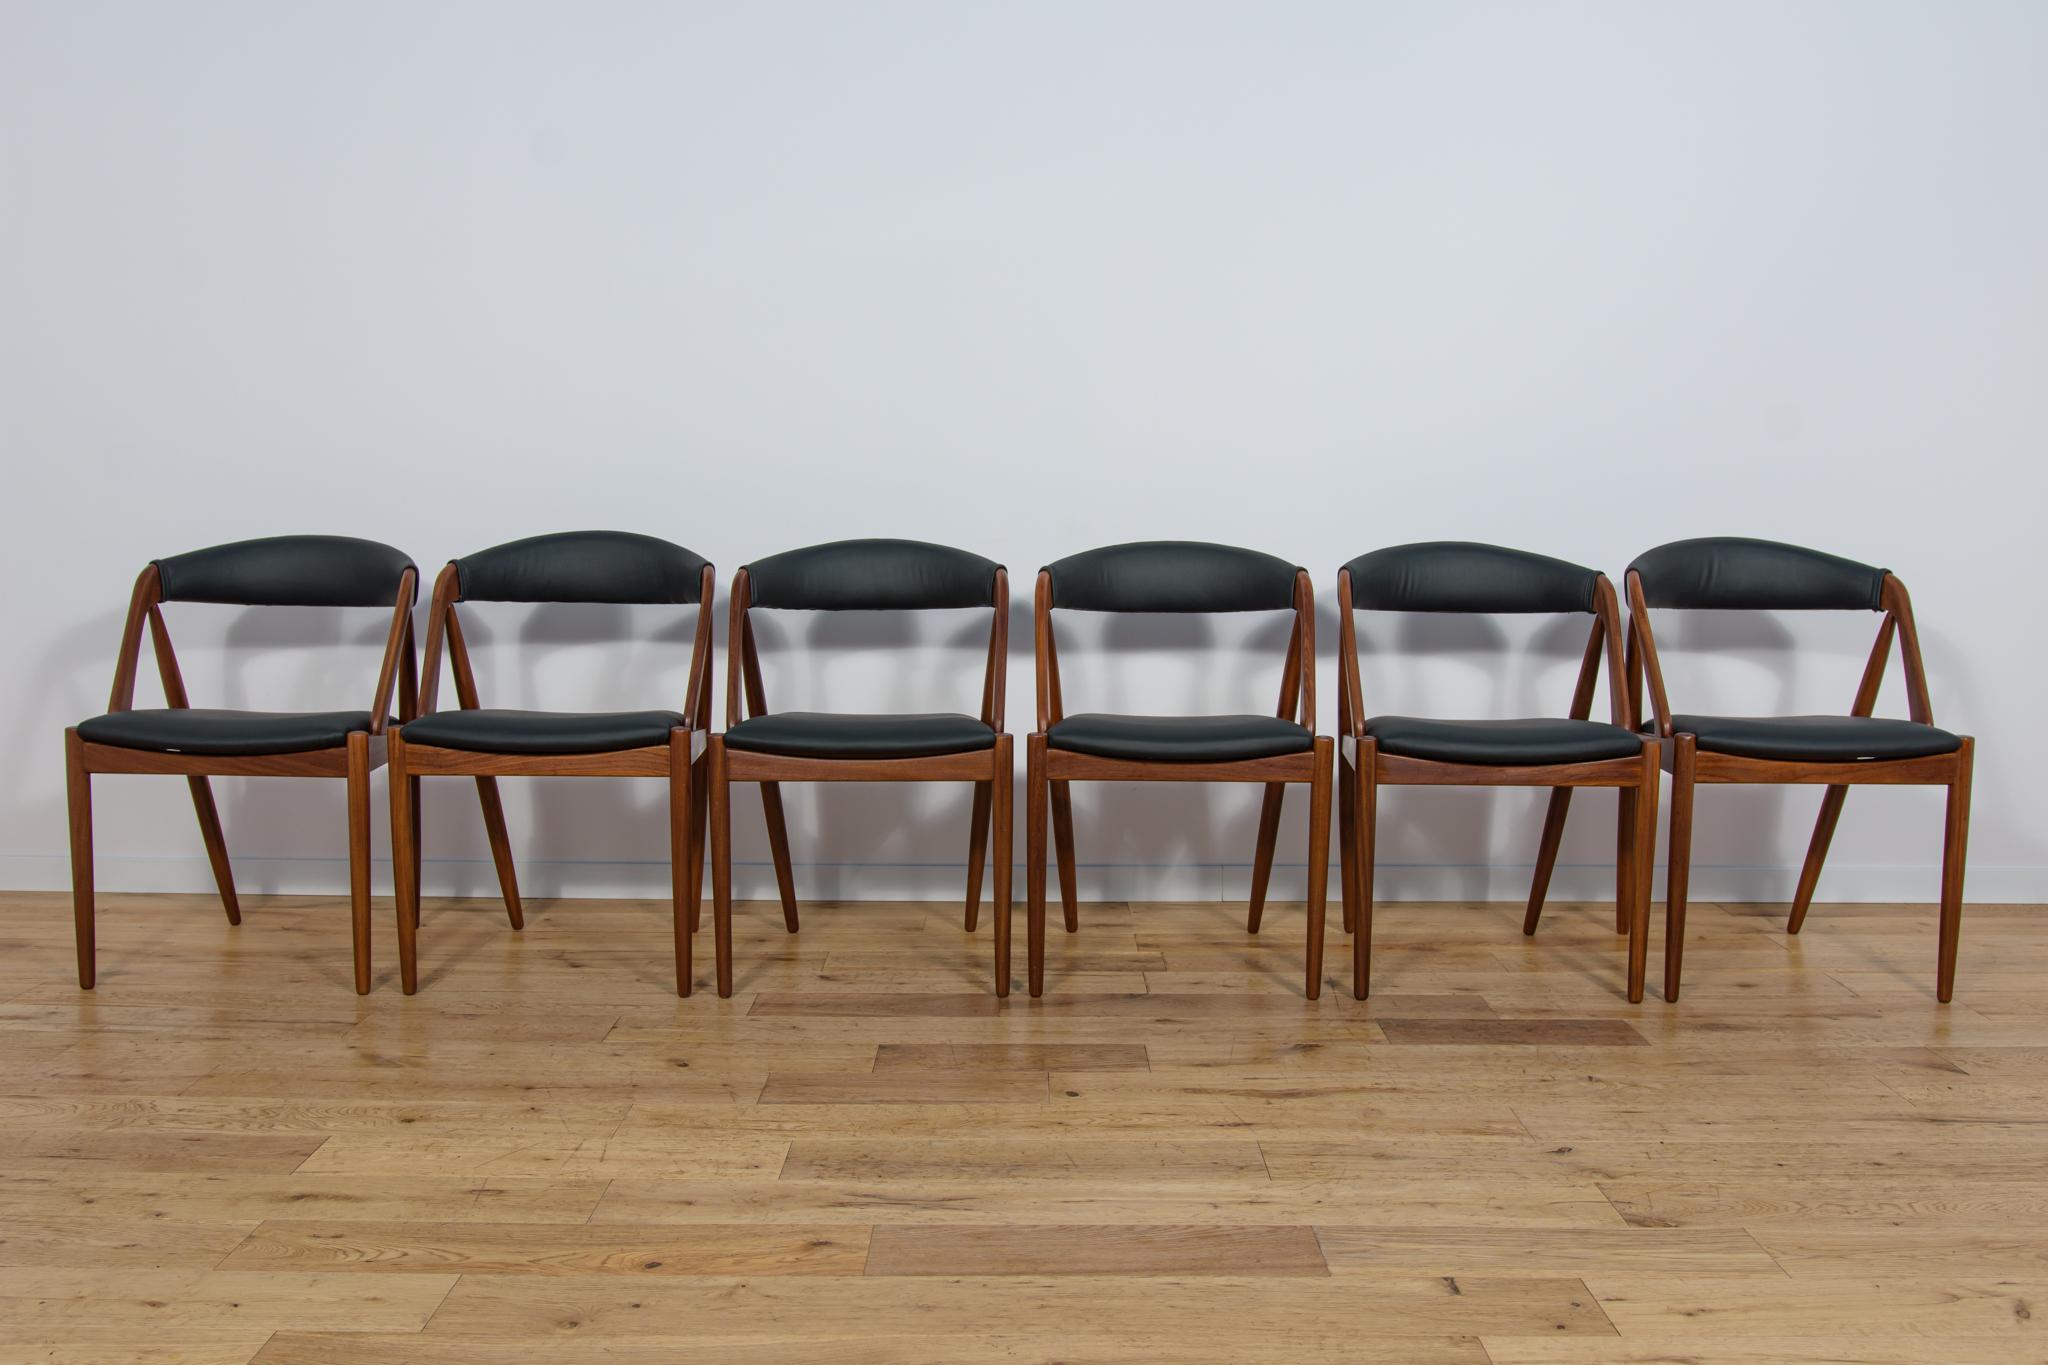 A set of six chairs Model 31 designed by Kai Kristiansen for the Danish manufacture Schou-Andersens Møbelfabrik in the 1960s. Frame made of teak wood. Completely restored. Wood has been cleaned of old coating, finished with Danish Oil . Foams